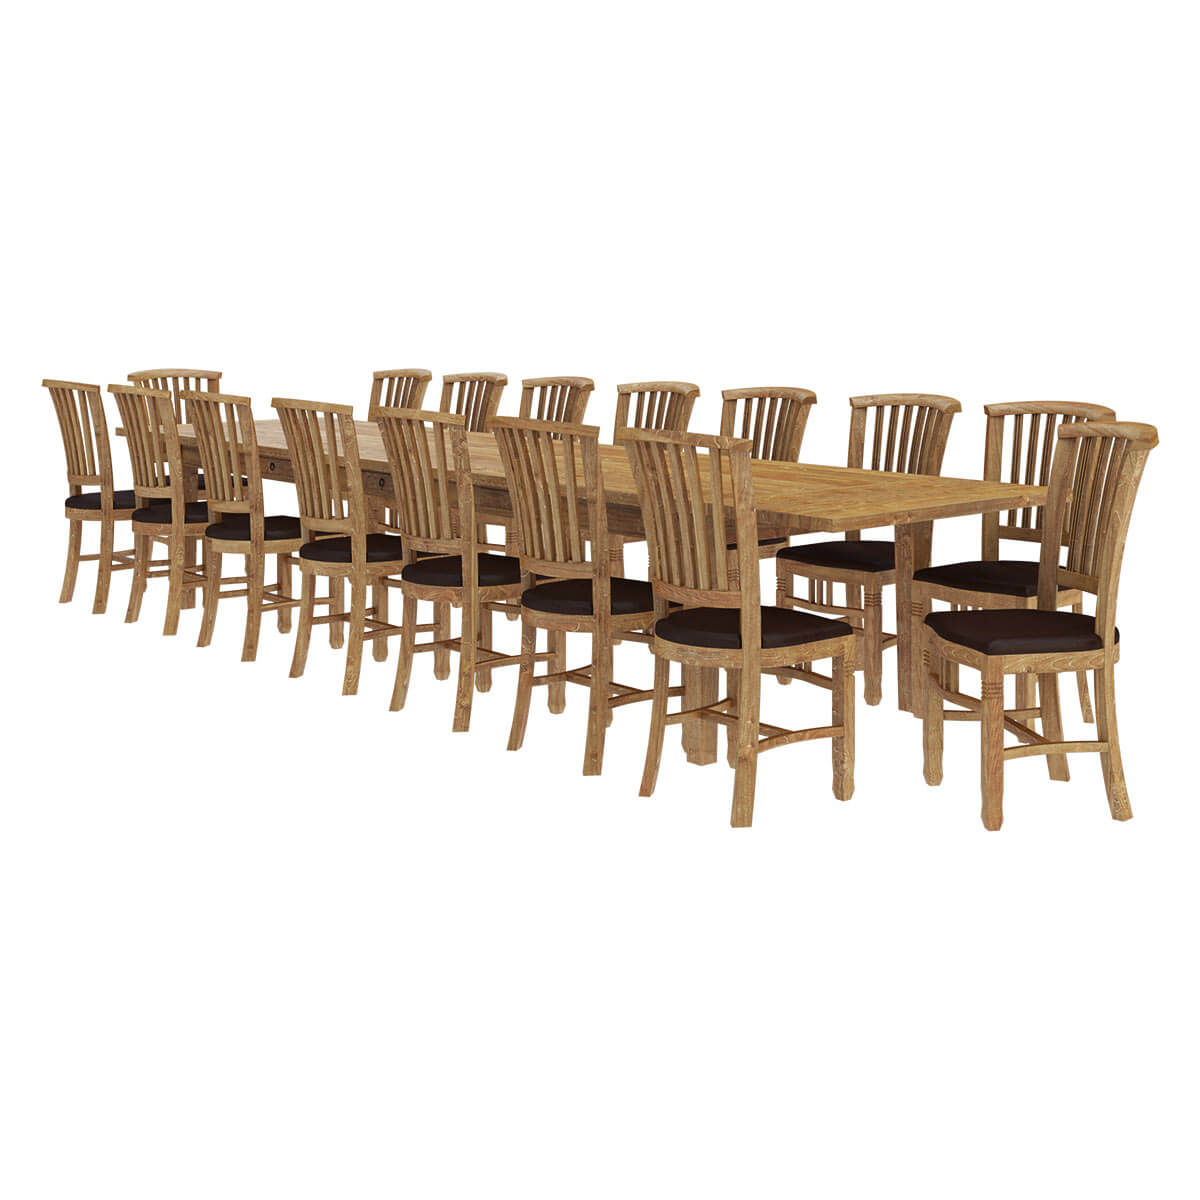 Brussels Teak Wood Large Extendable Dining Table For 16 People